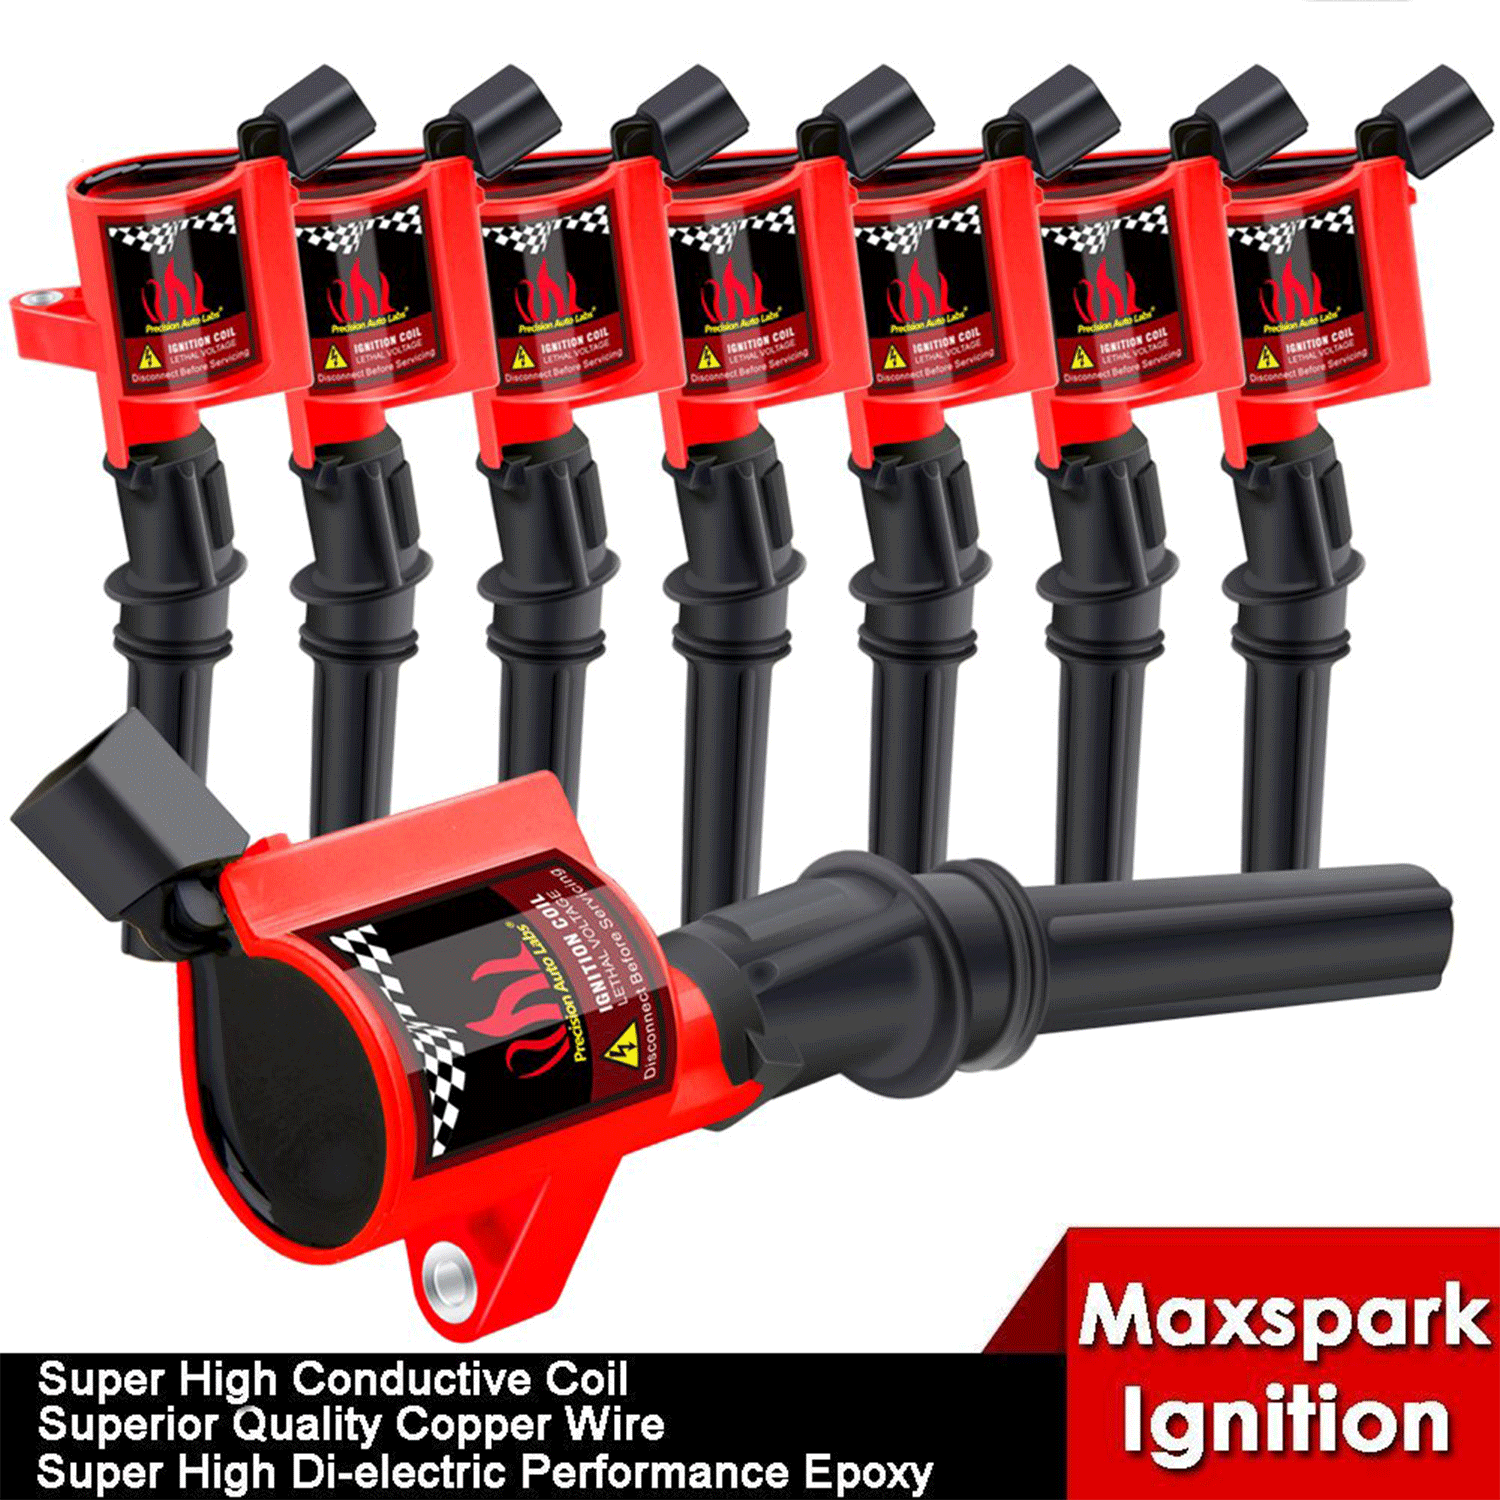 TRIL GEAR Ignition Coils Pack of 8 Compatible with Ford Lincoln Mercury V8 4.6L 5.4L & V10 6.8L 2004-2008 Replacement for DG511 C1541 FD508 